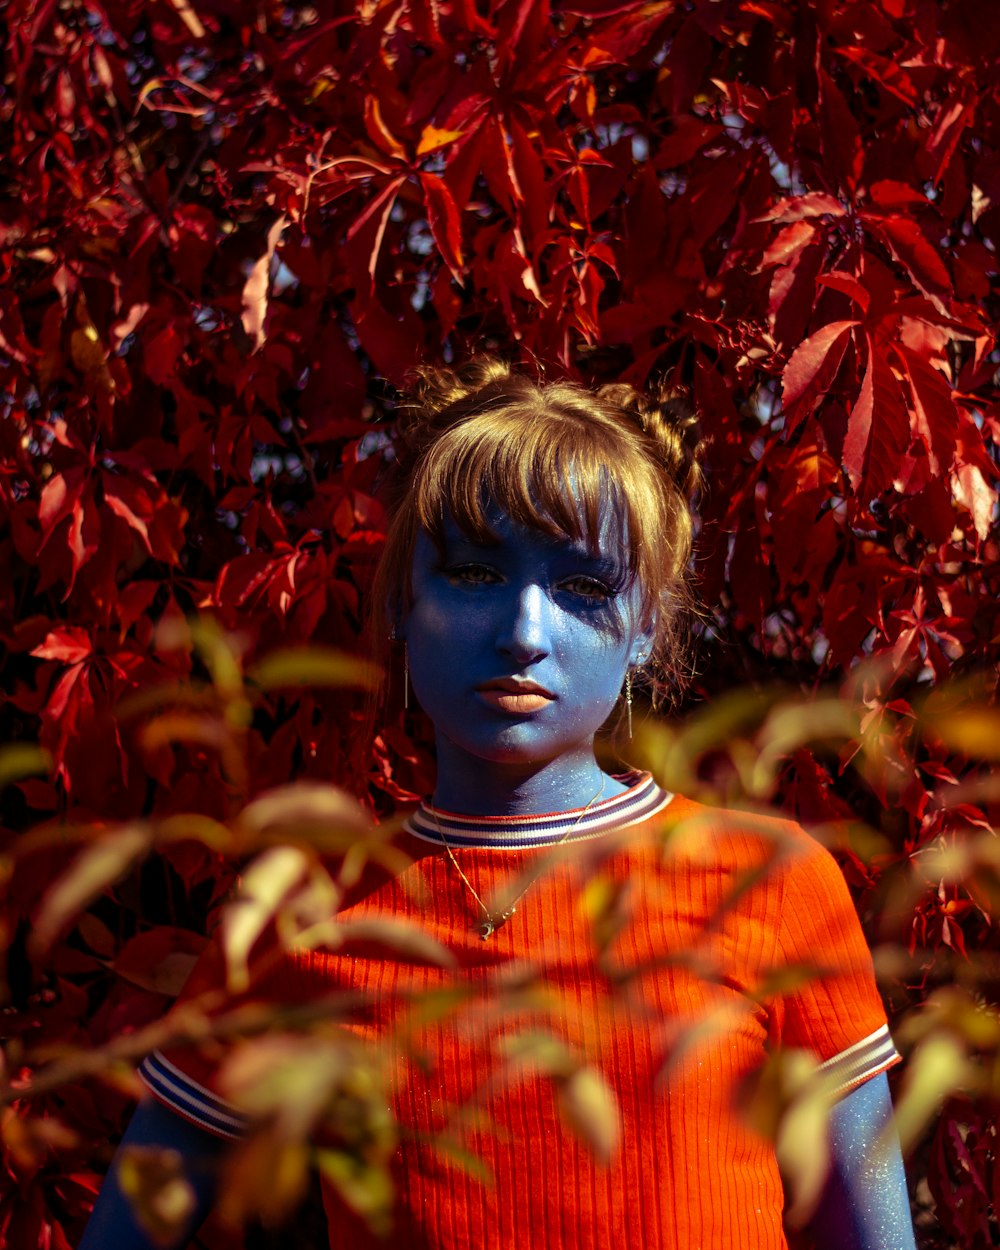 blue skinned girl wearing red crew-neck shirt surrounded by red maple leaves